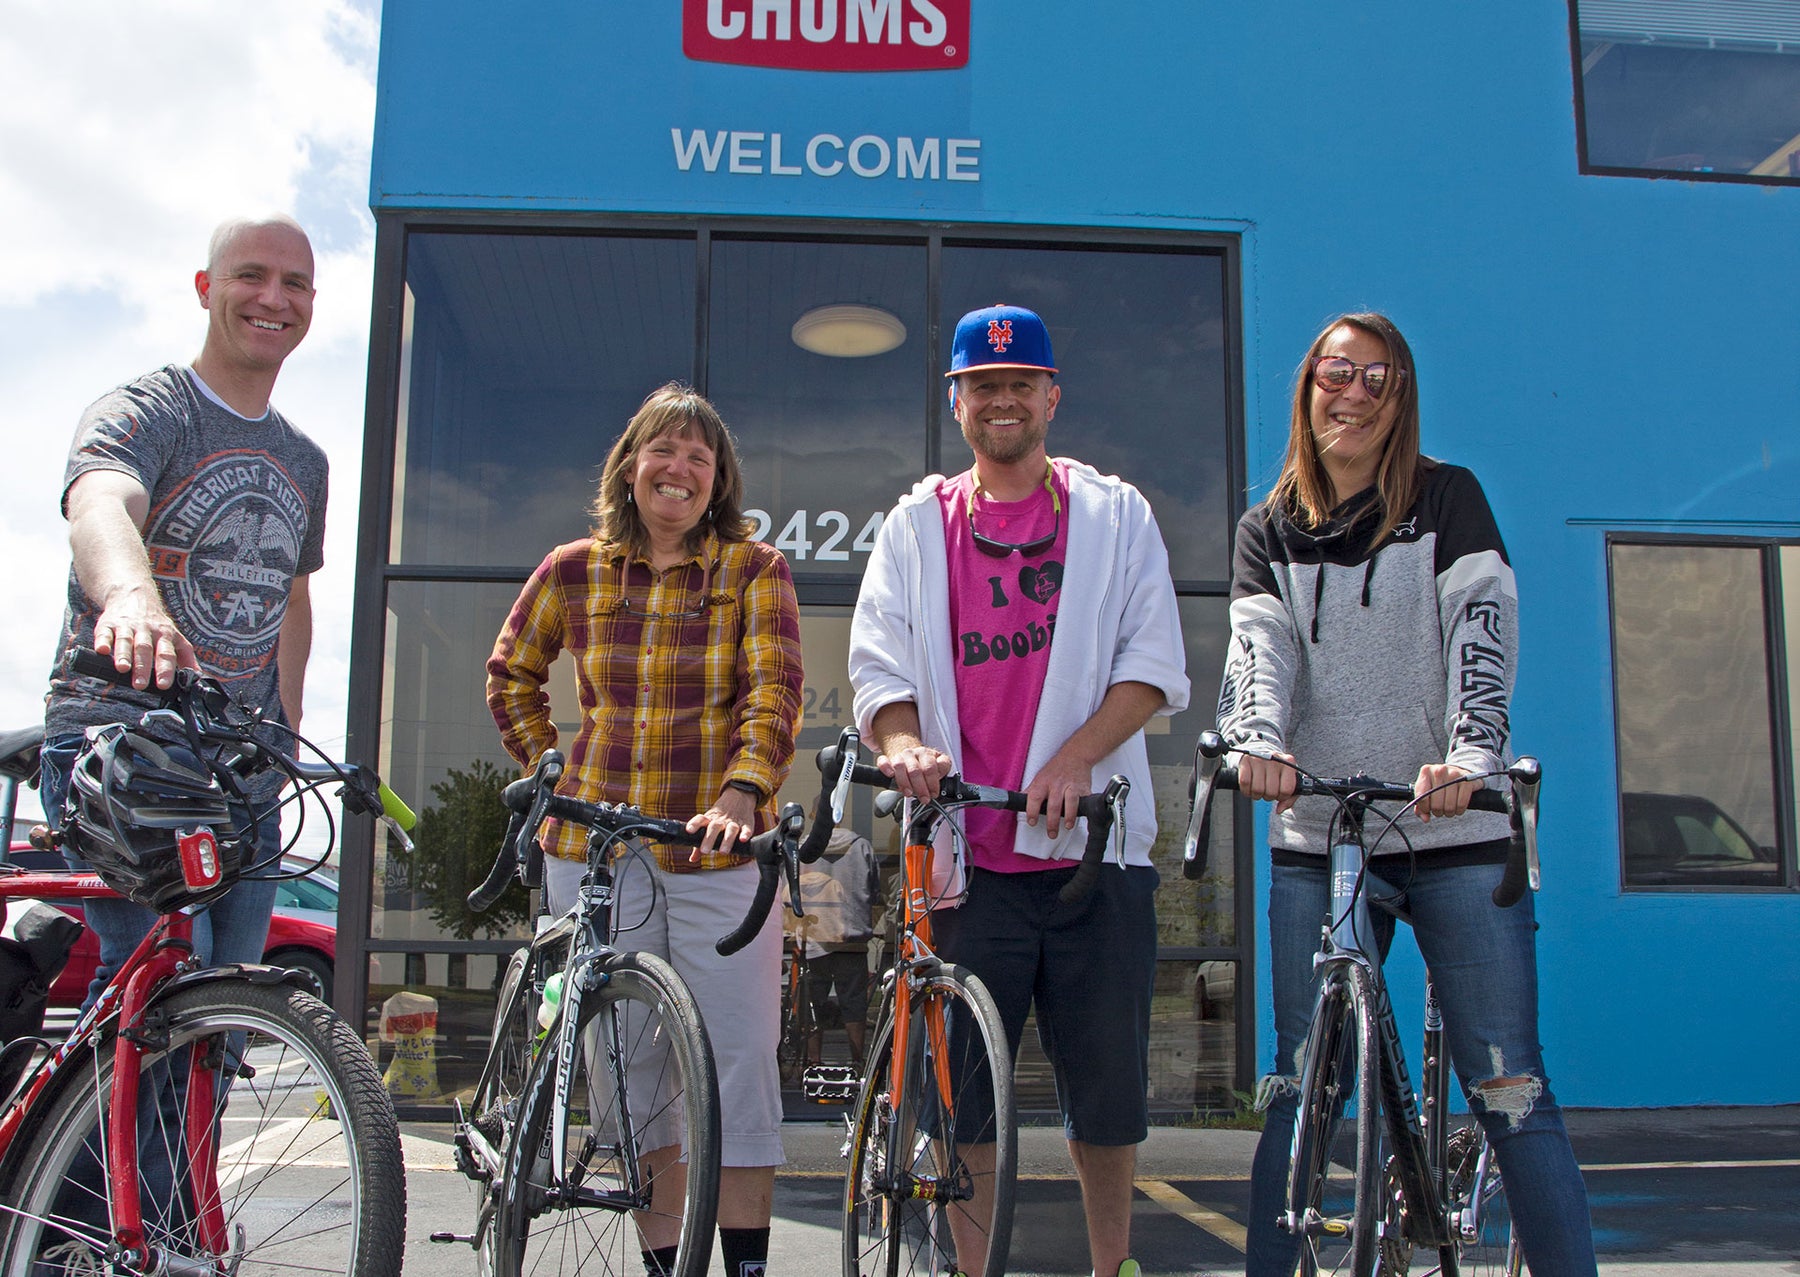 Chums crew on Ride Your Bike to Work day.